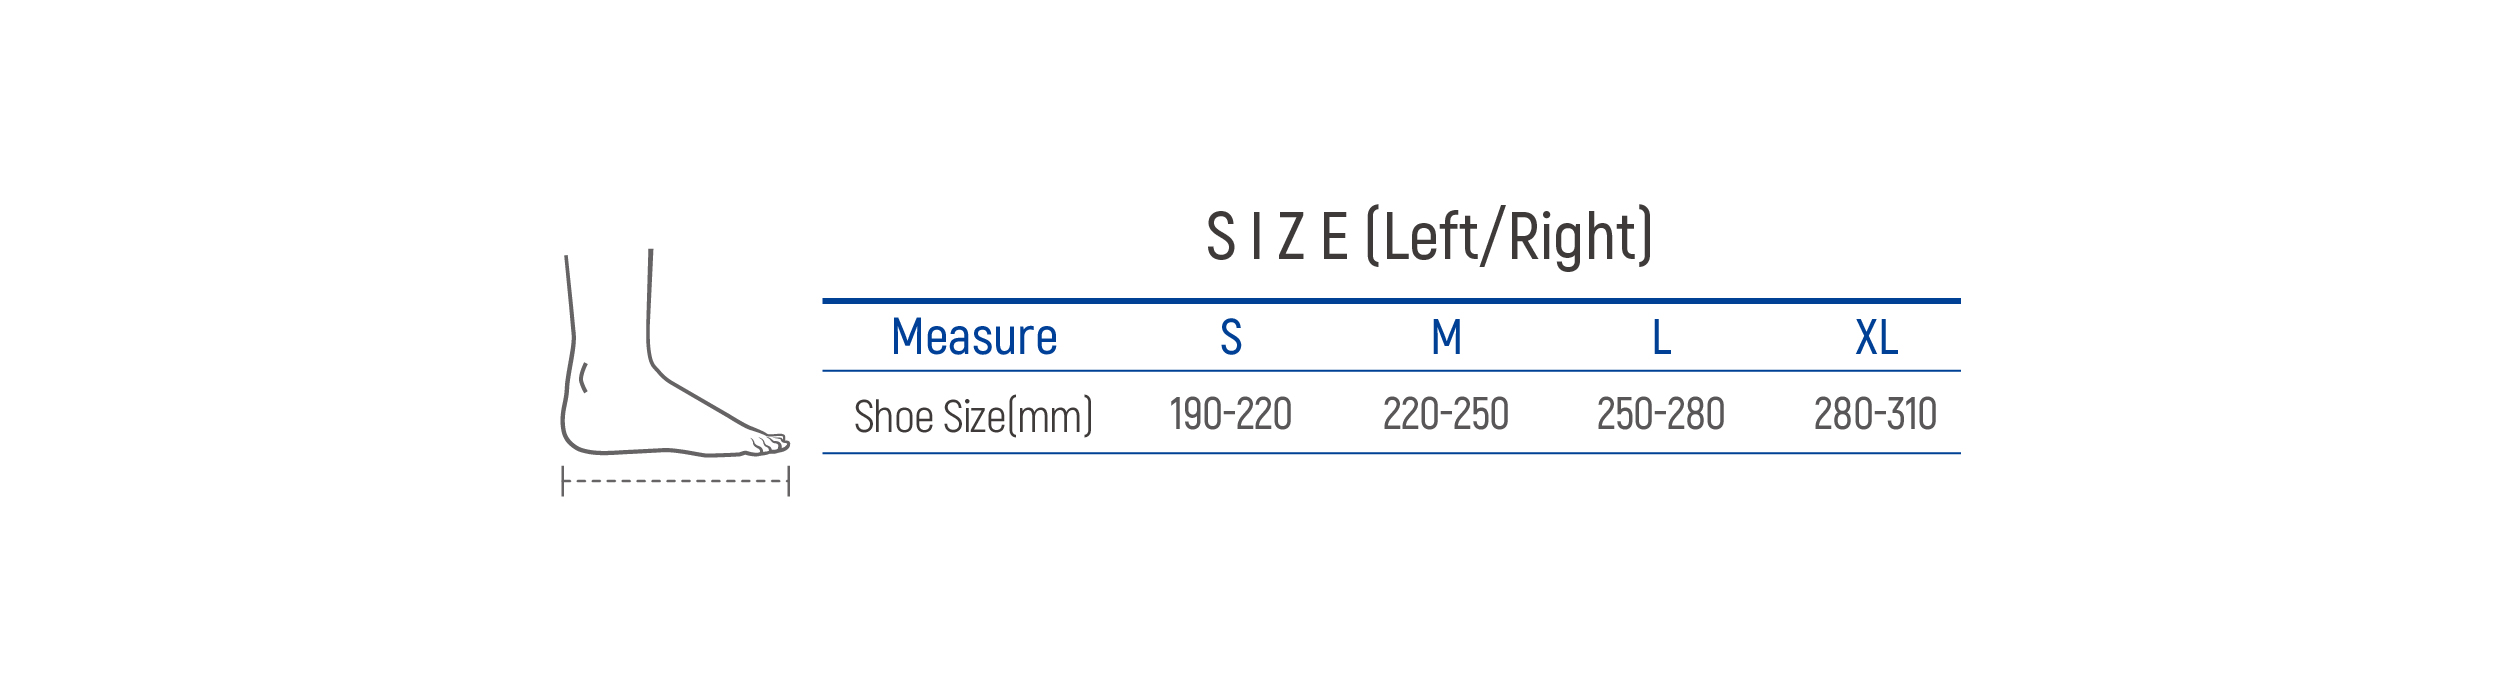 Ankle Foot Orthosis for Foot Drop AFO size chart